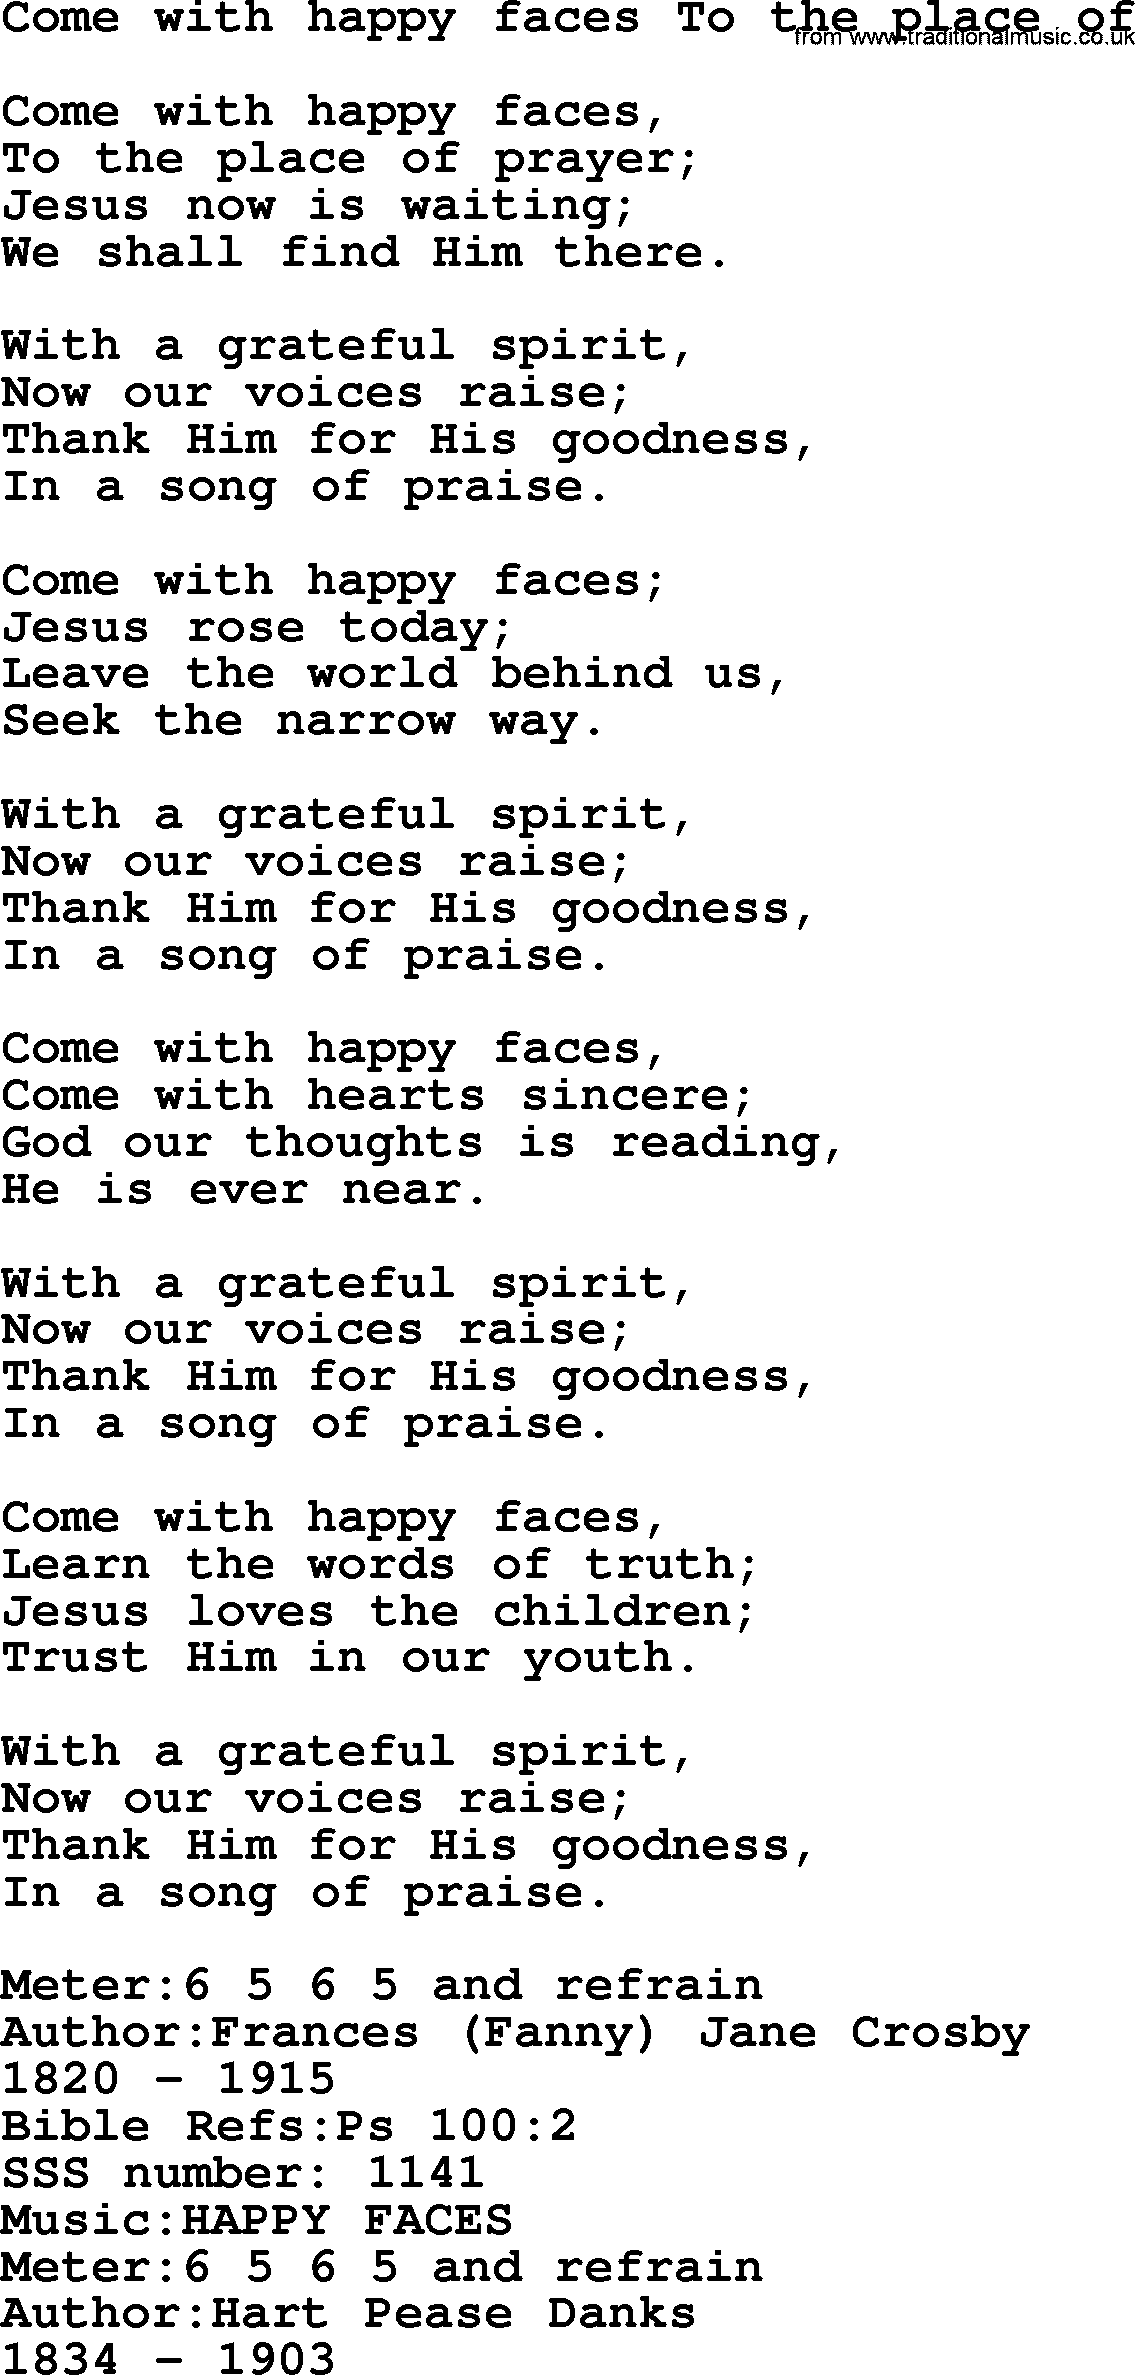 Sacred Songs and Solos complete, 1200 Hymns, title: Come With Happy Faces To The Place Of, lyrics and PDF